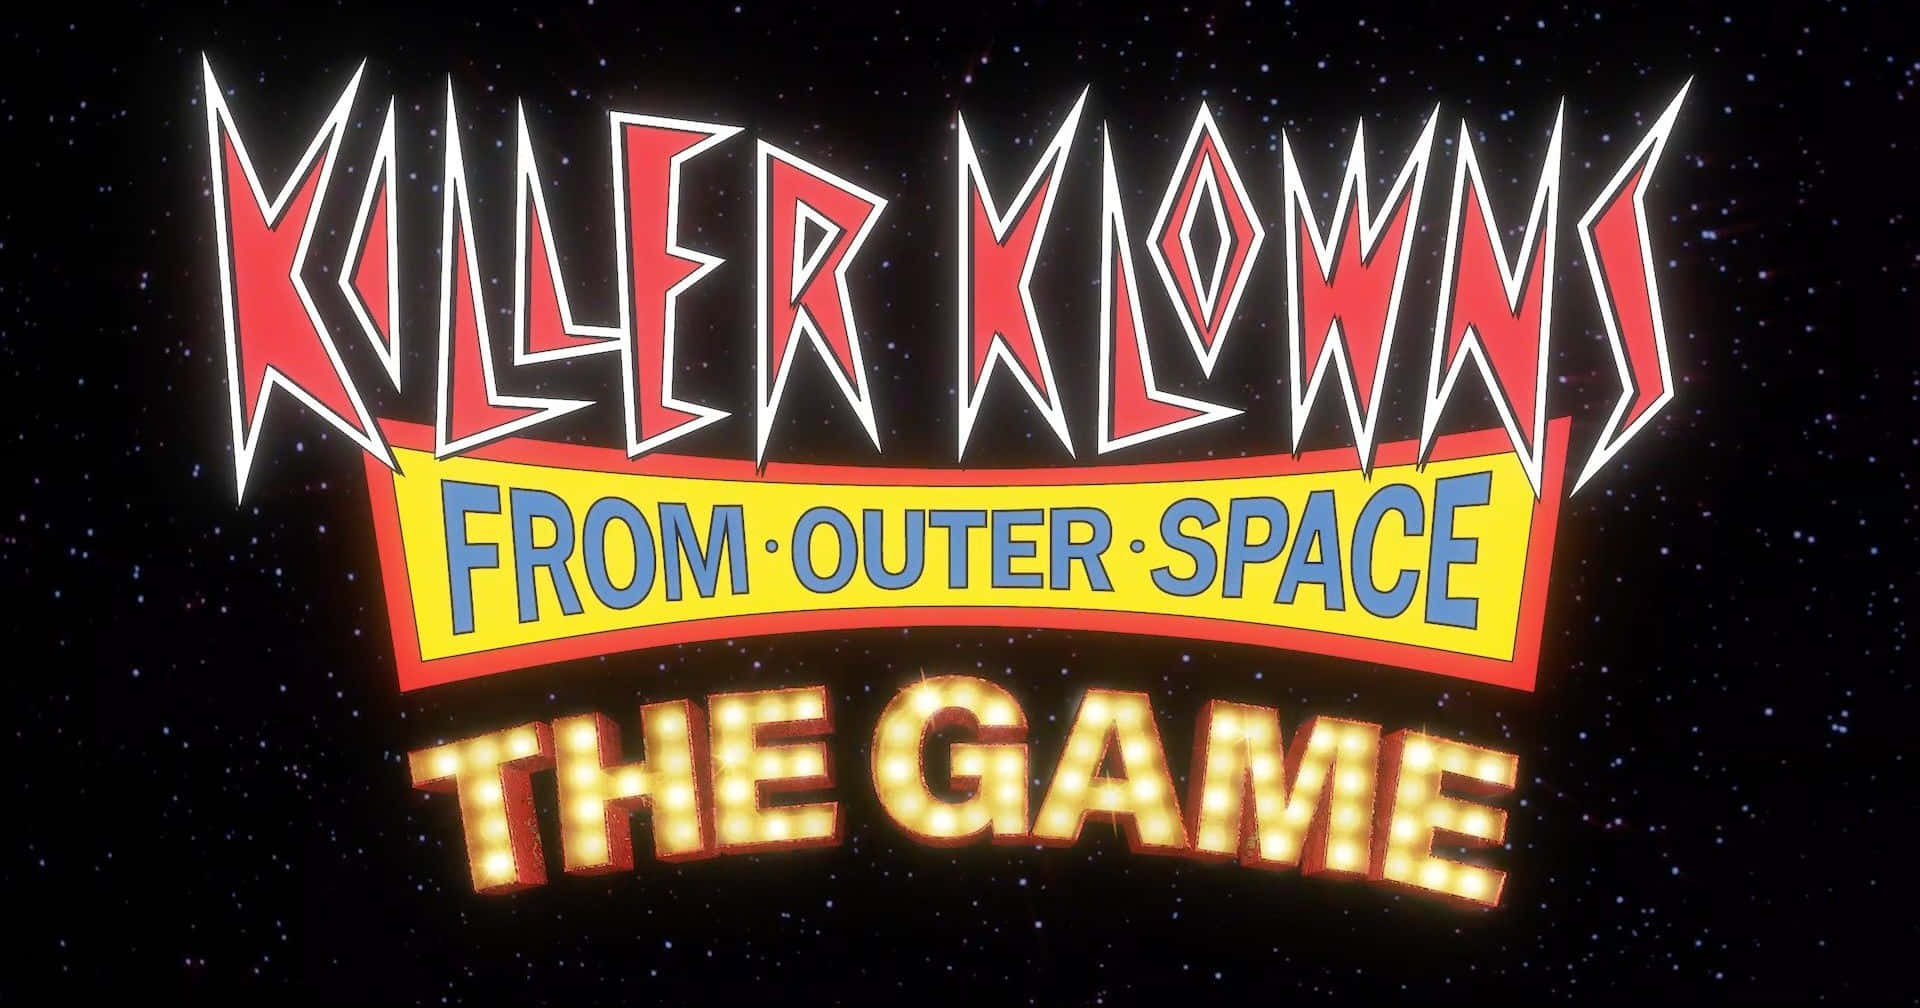 Get ready for some intergalactic havoc with the unforgettable Killer Klowns from Outer Space Wallpaper